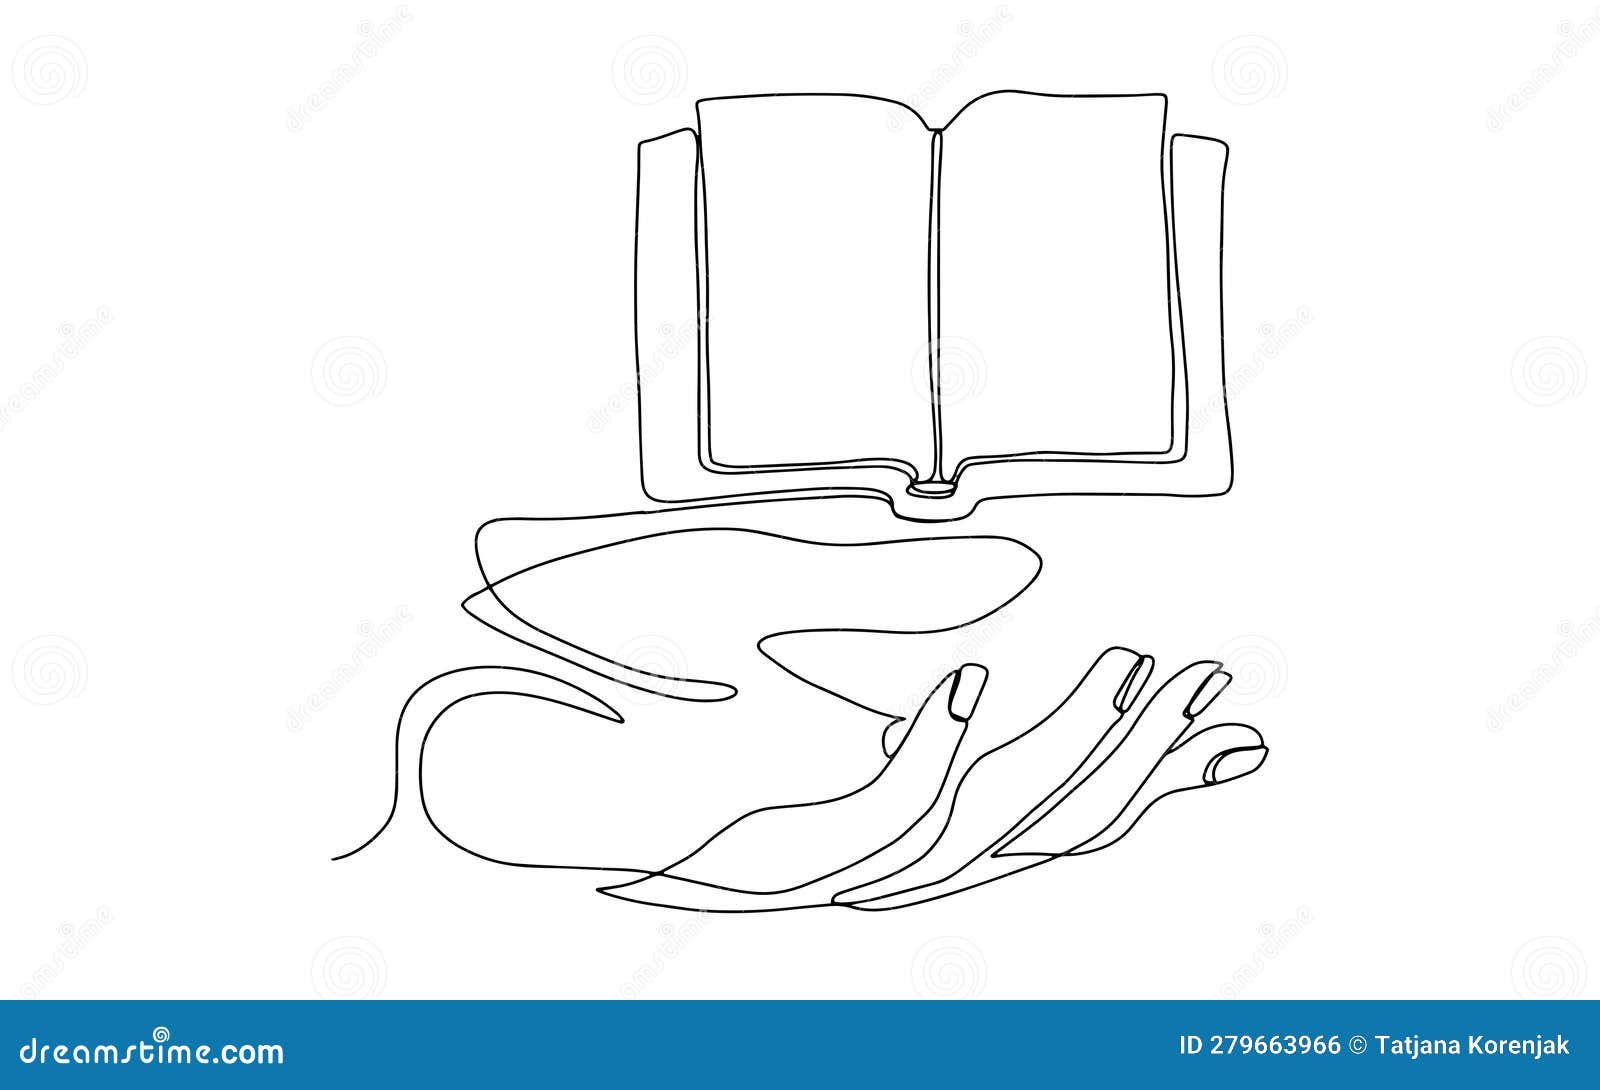 Continuous one line drawing of a hands holding open book flying